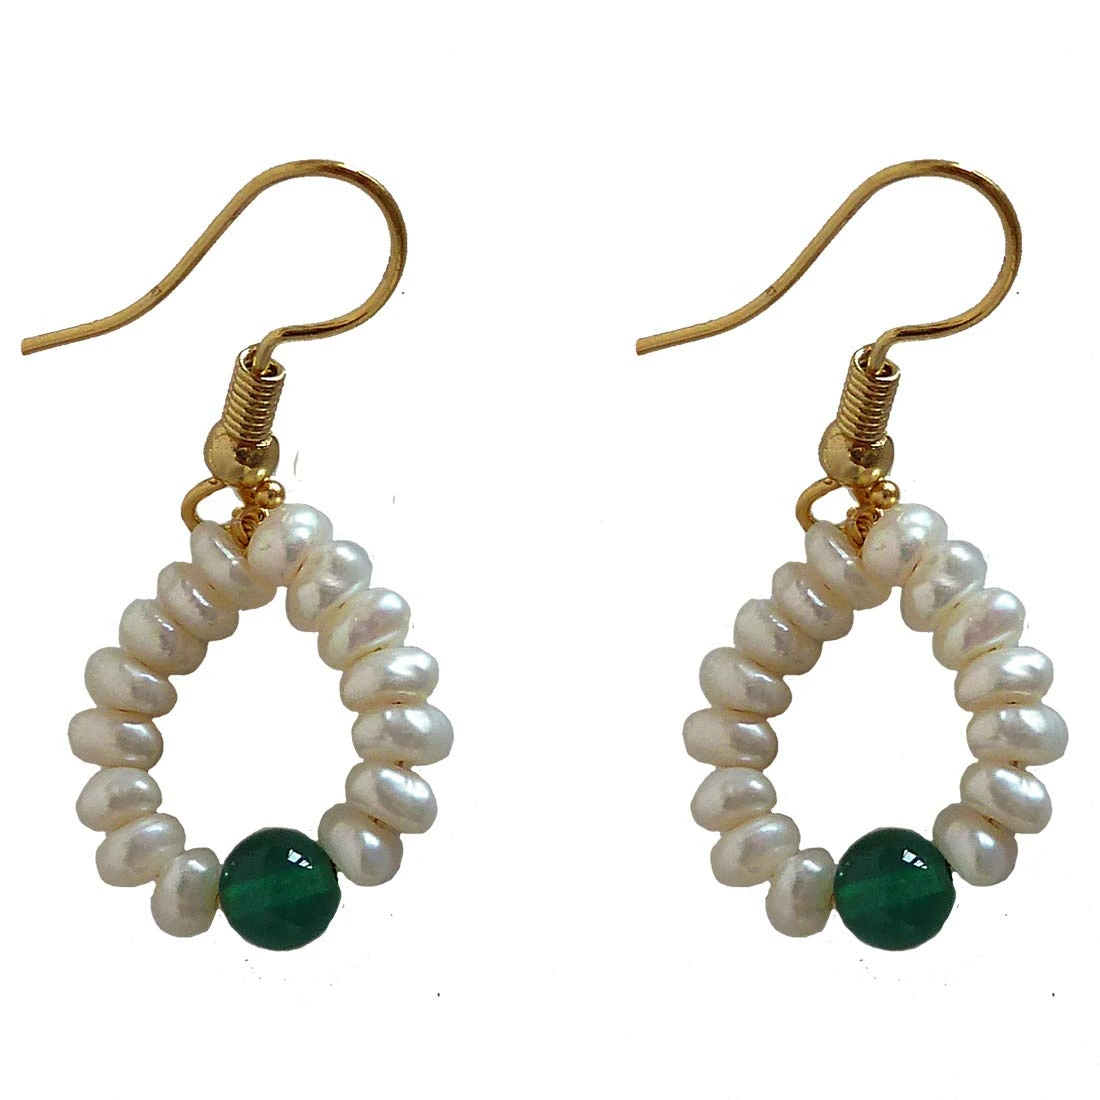 Dangling Circular Green Onyx Beads, Freshwater Pearl and Gold Plated Wire Style Earrings(SE384)